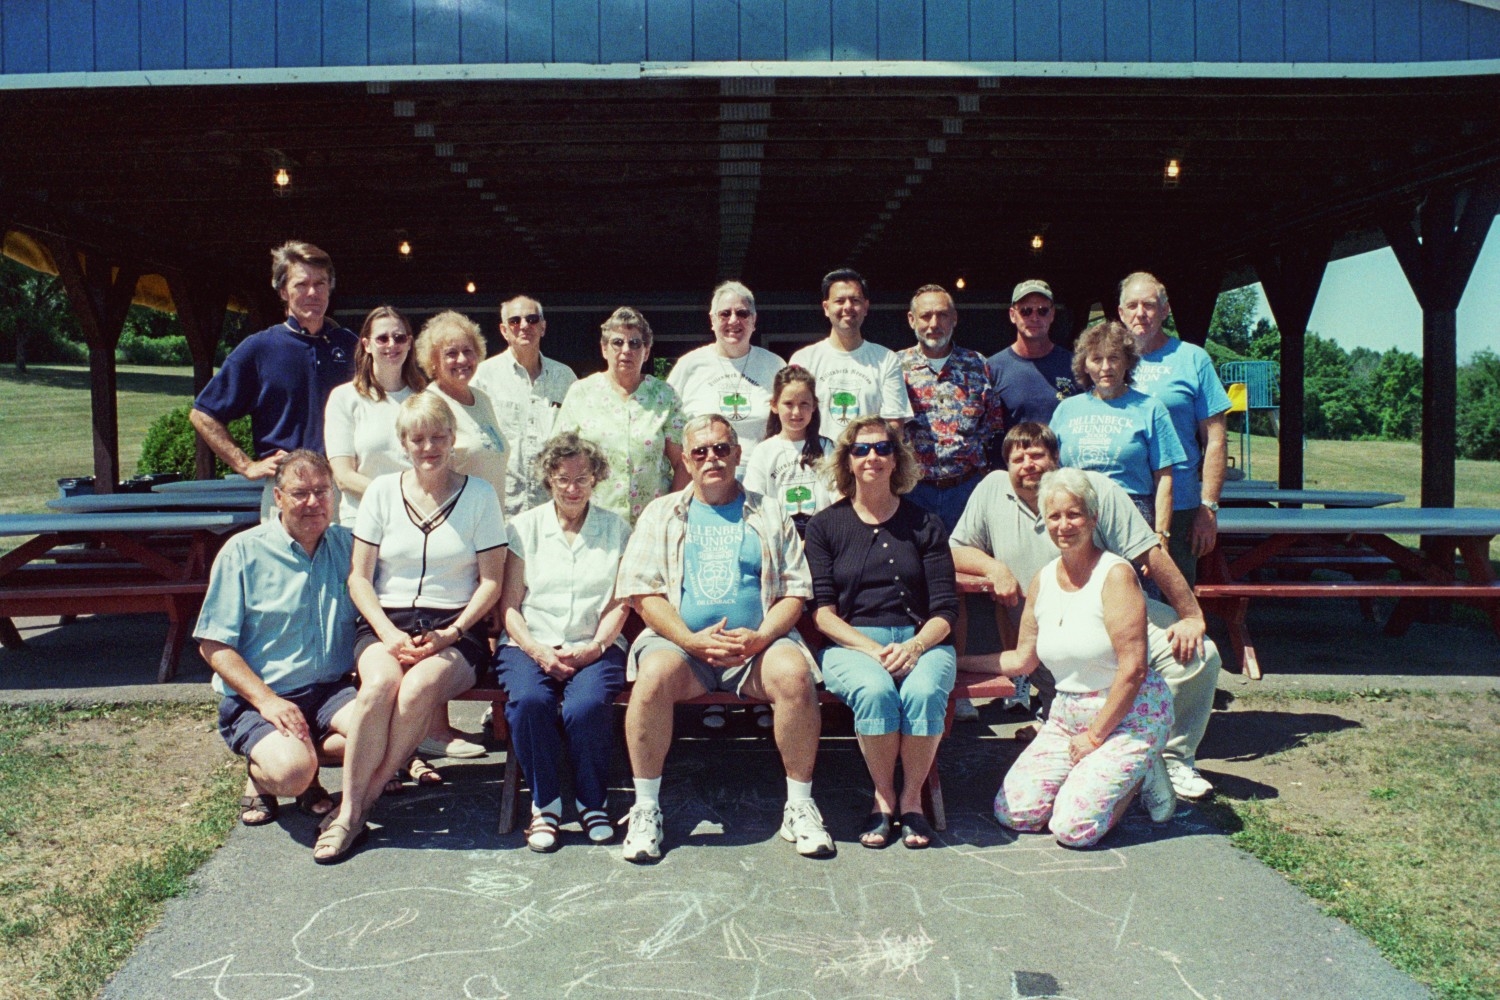 The 106th Dillenbeck Family Reunion